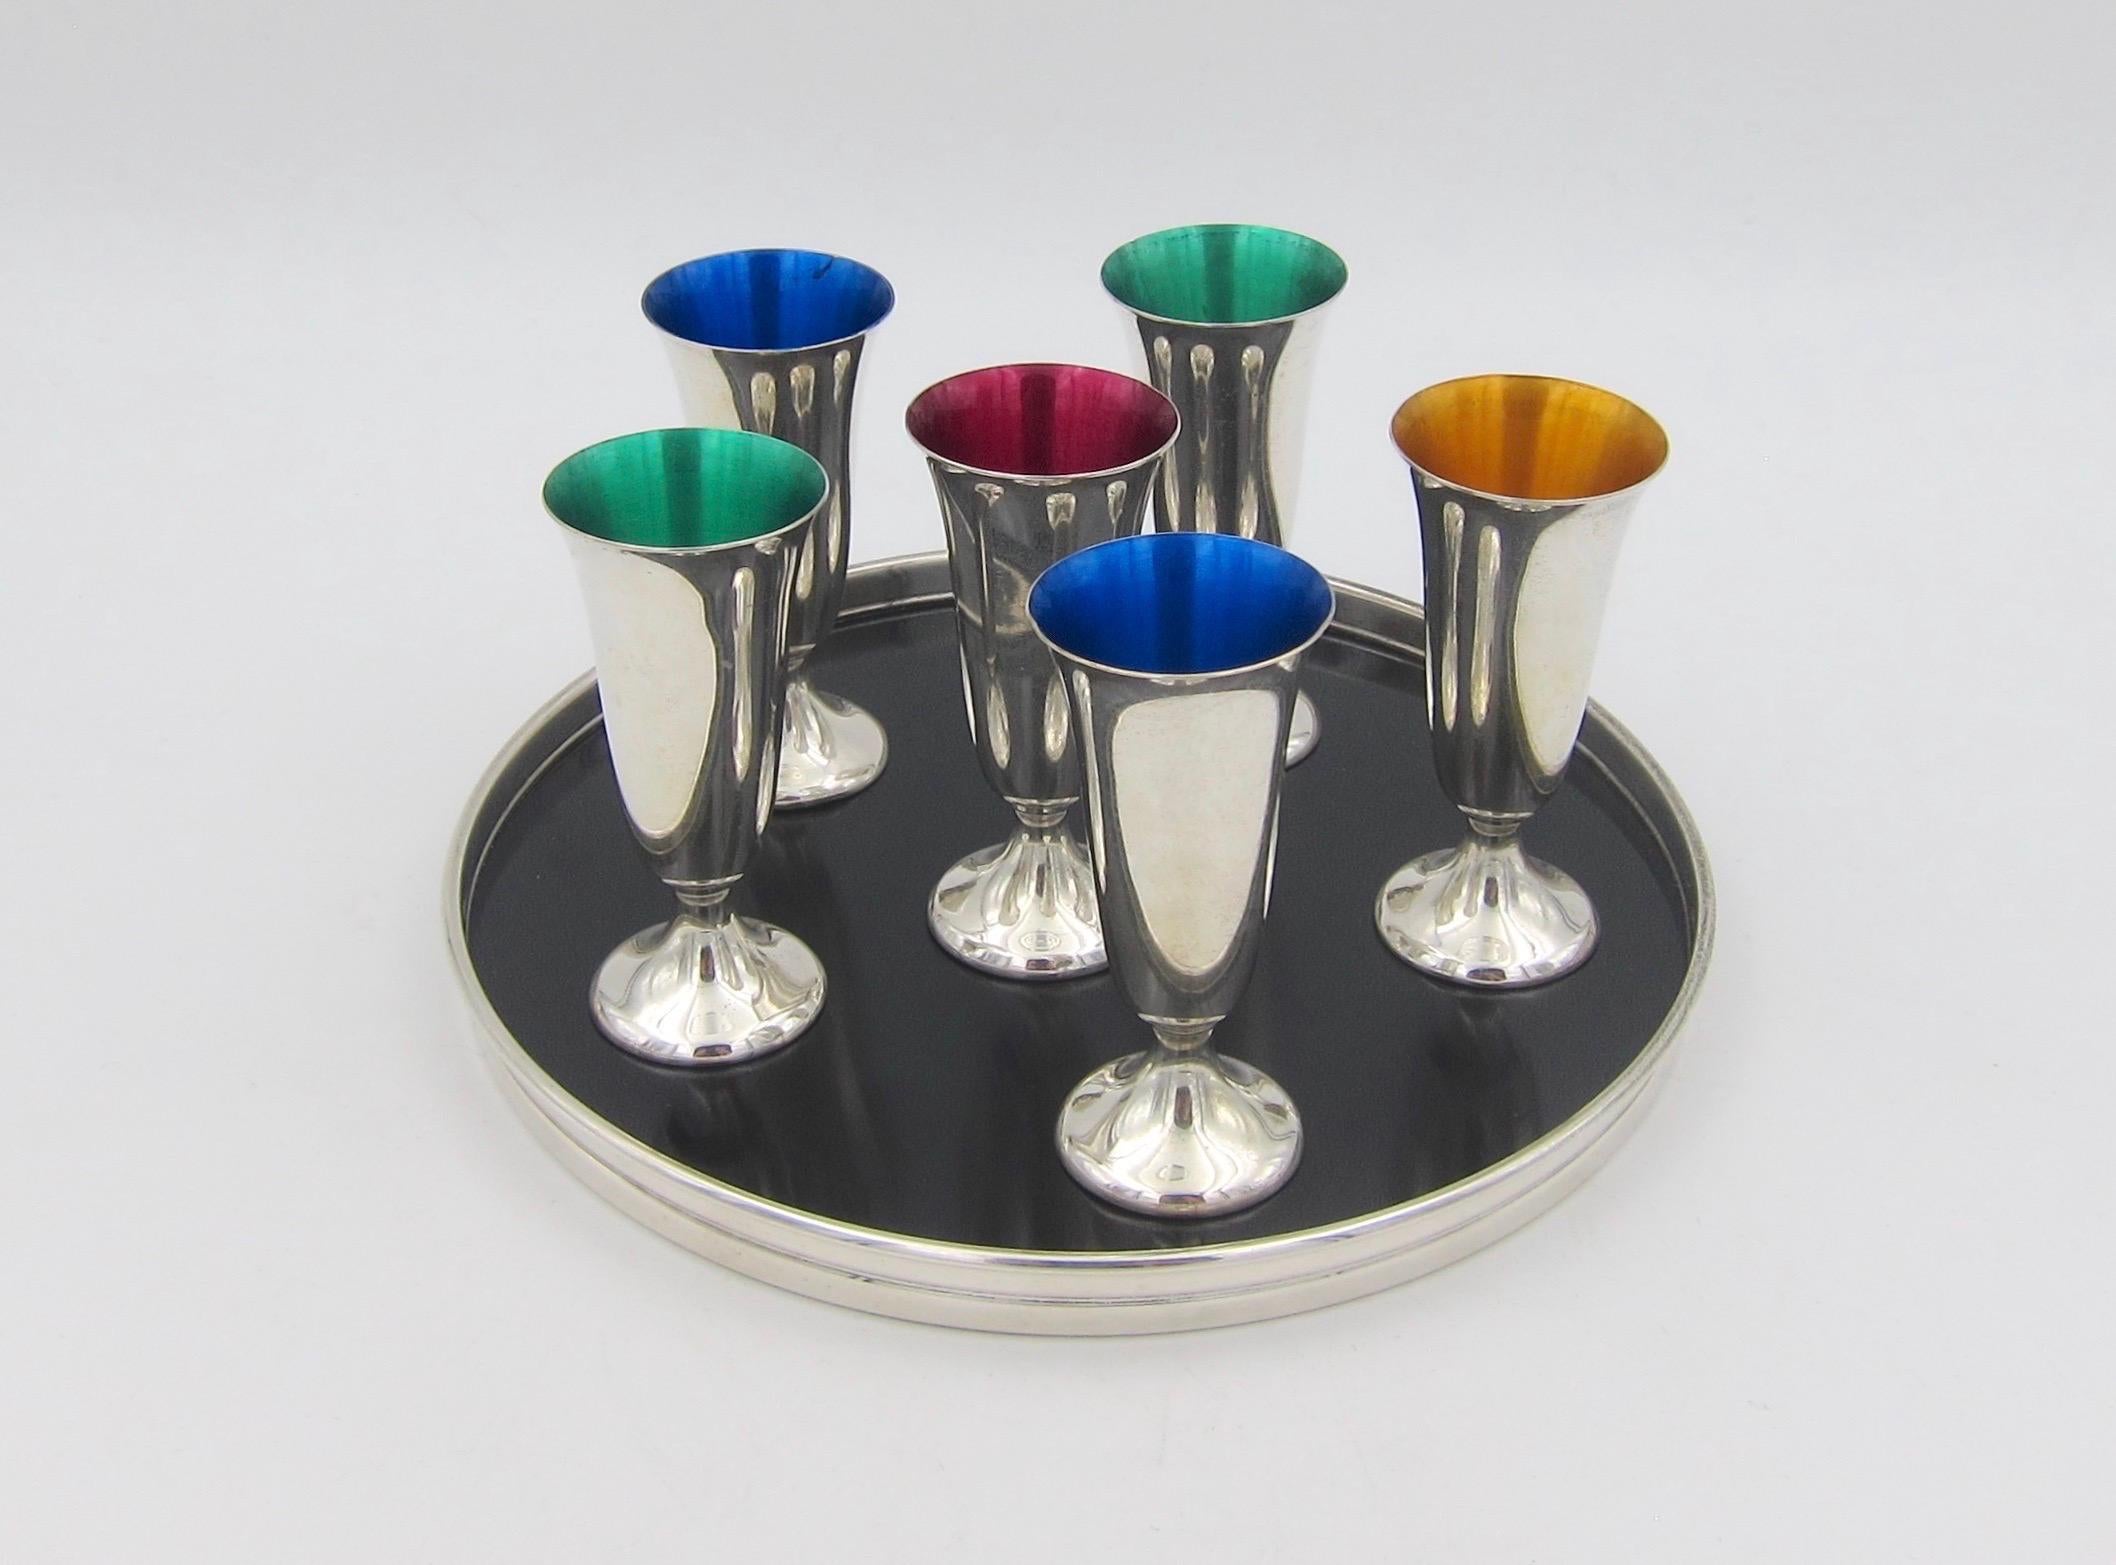 A seven-piece midcentury vodka or cordial set in sterling silver with jewel-toned interiors of gold, red, blue, and green from Gorham Manufacturing Company of Providence, Rhode Island. 

The urn-shaped footed cordials measure 2.74 in. height x 1.25